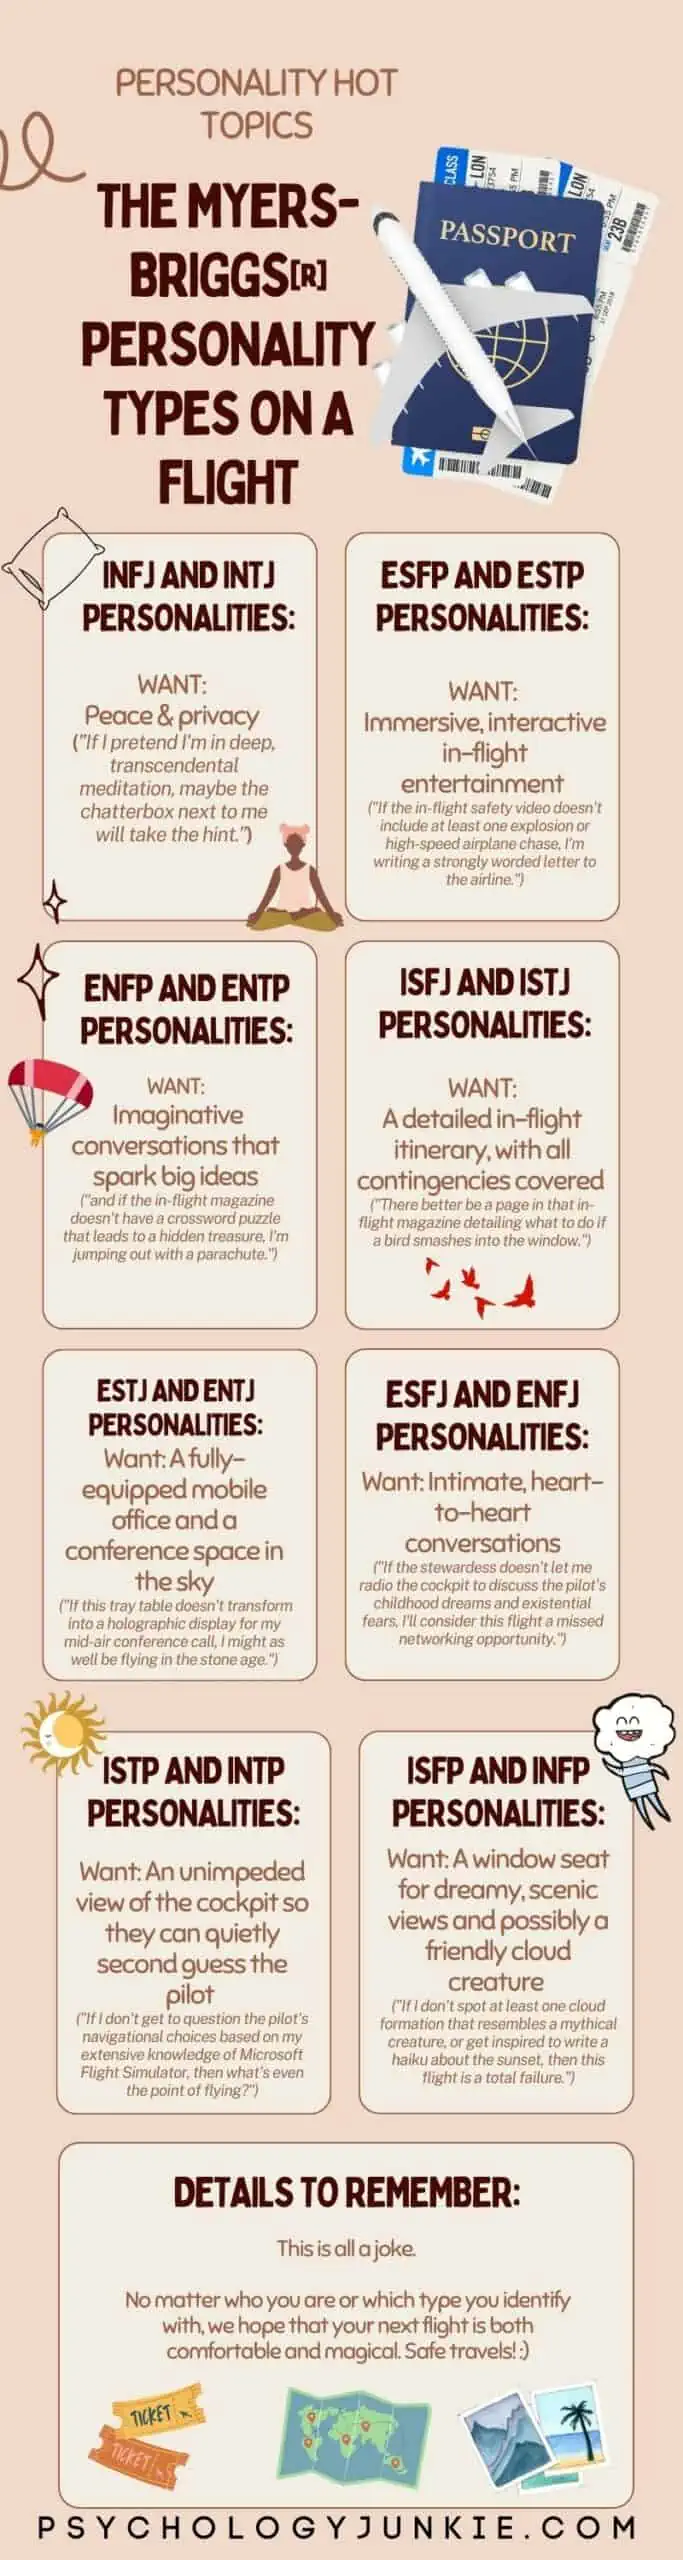 The 16 Myers-Briggs personality types, and their thoughts while flying. #MBTI #Personality #INFP